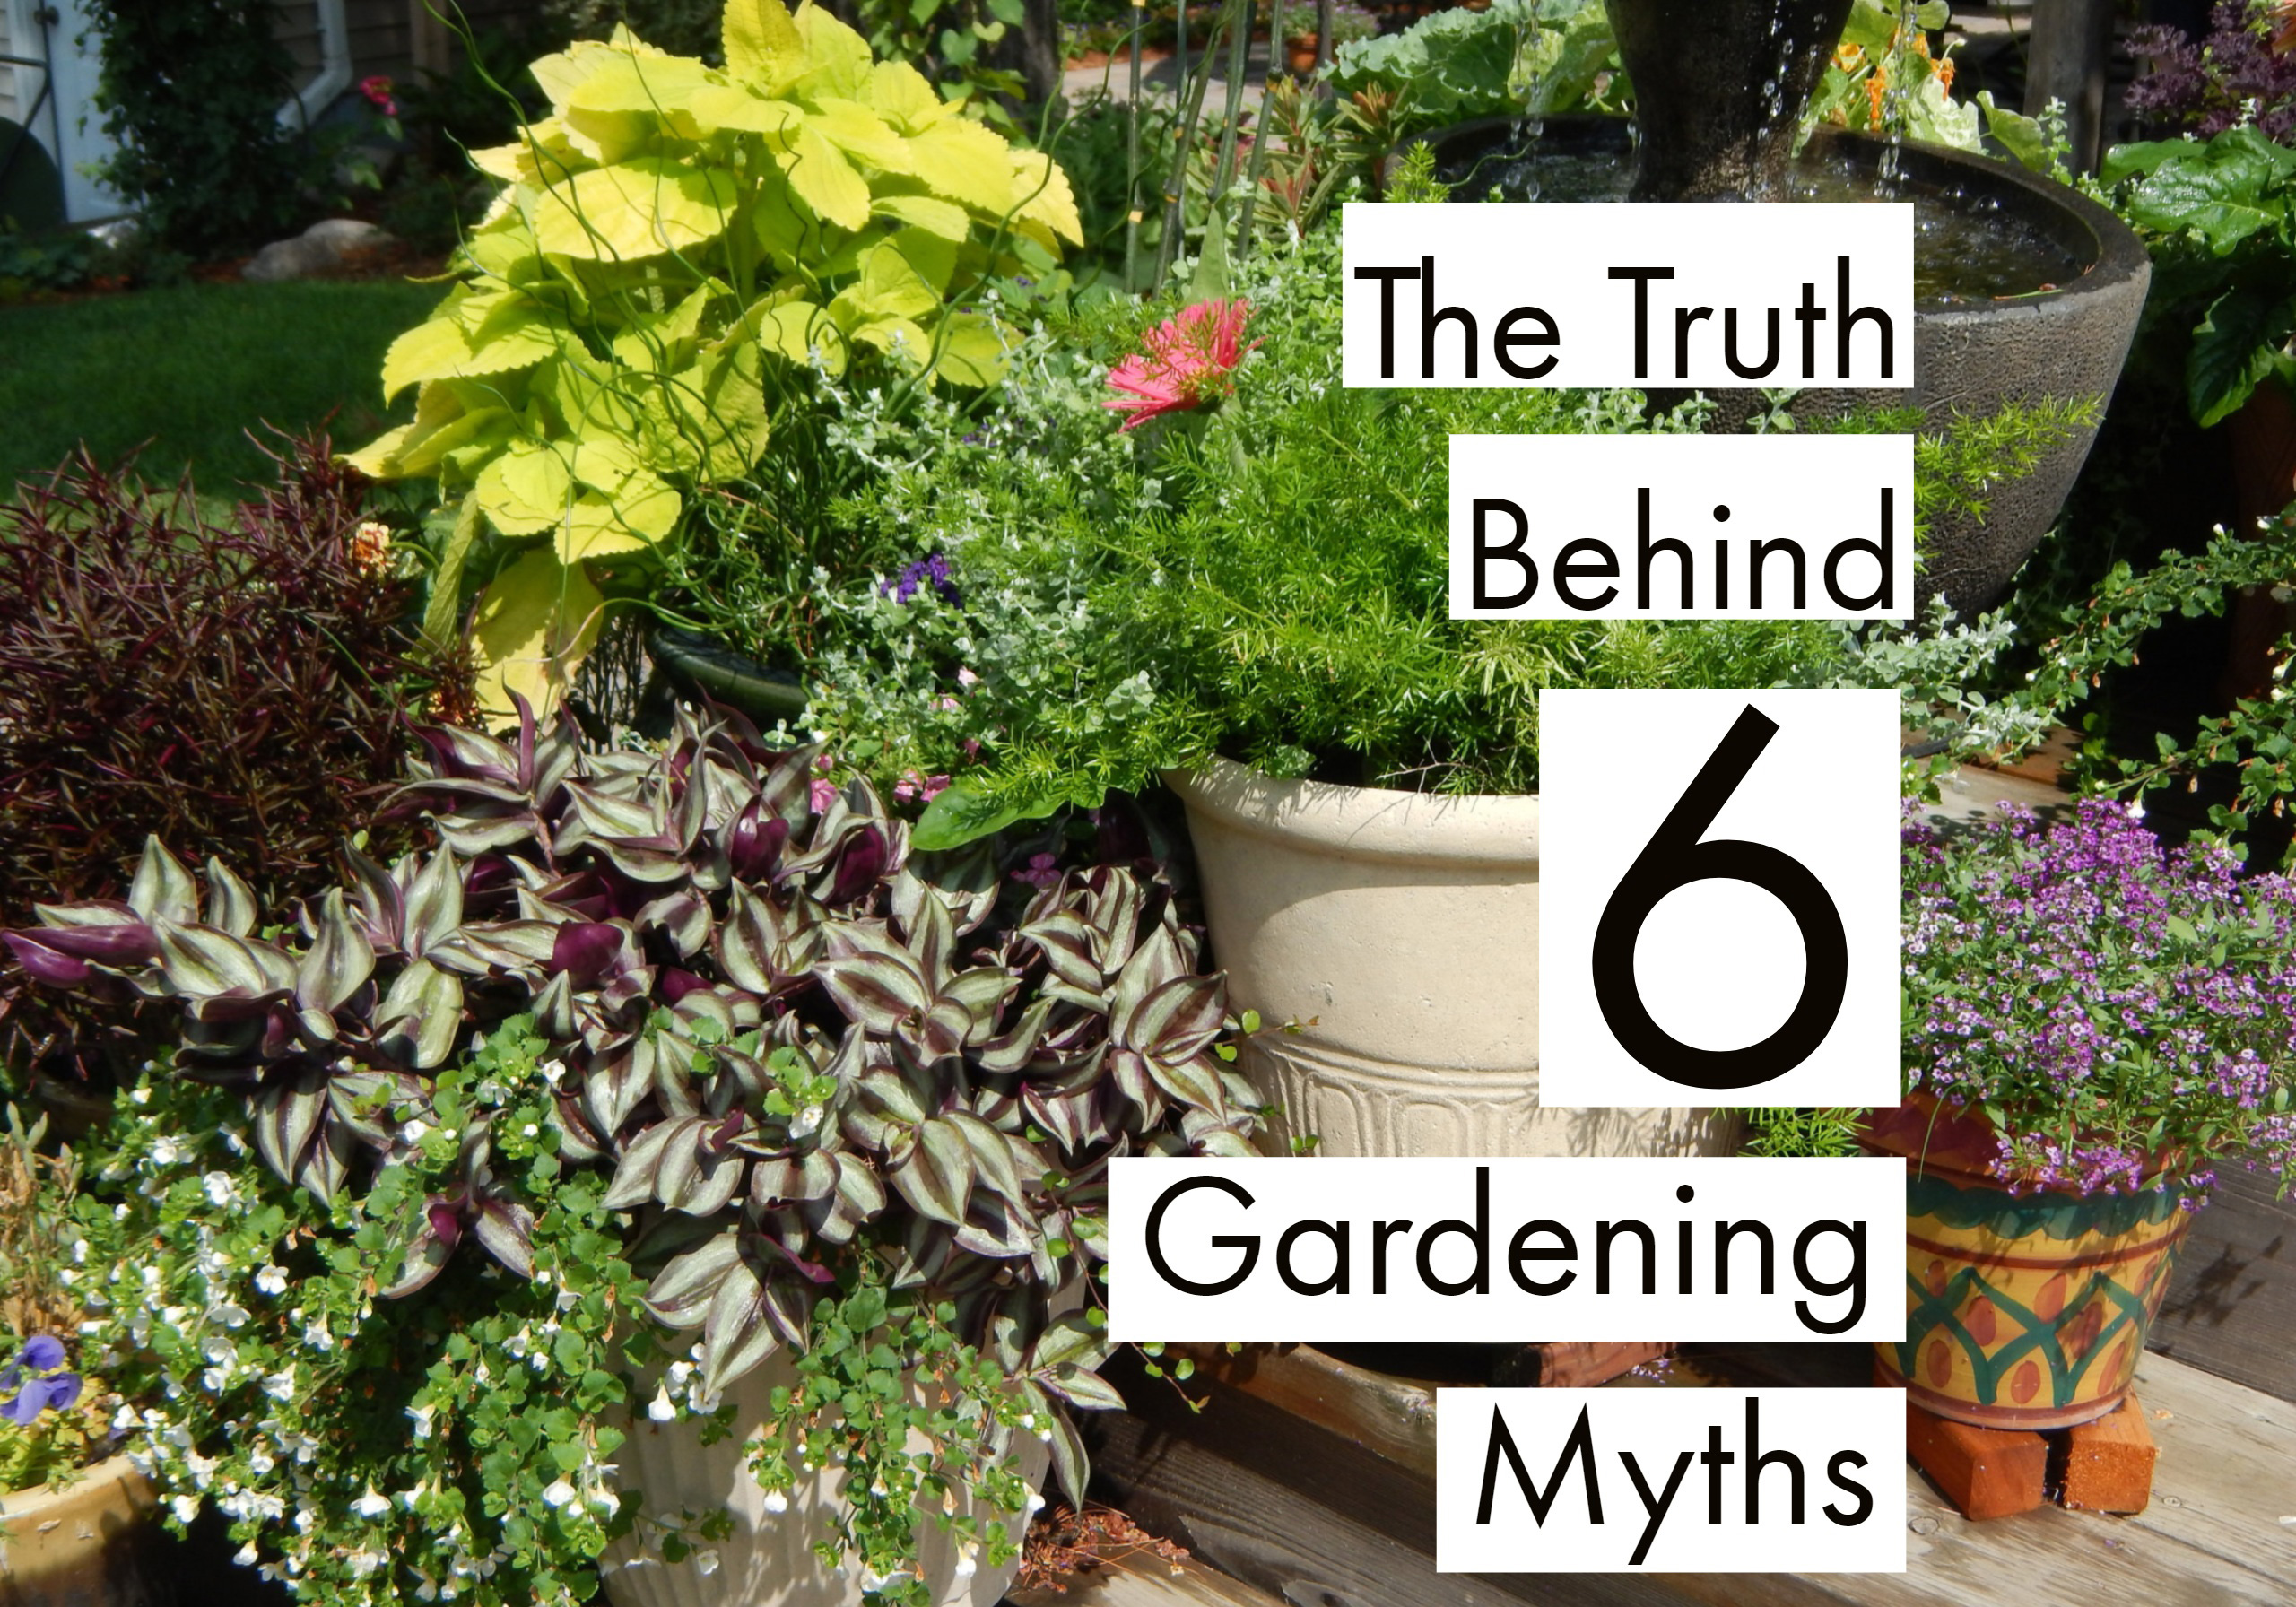 What’s the truth behind 6 gardening myths?